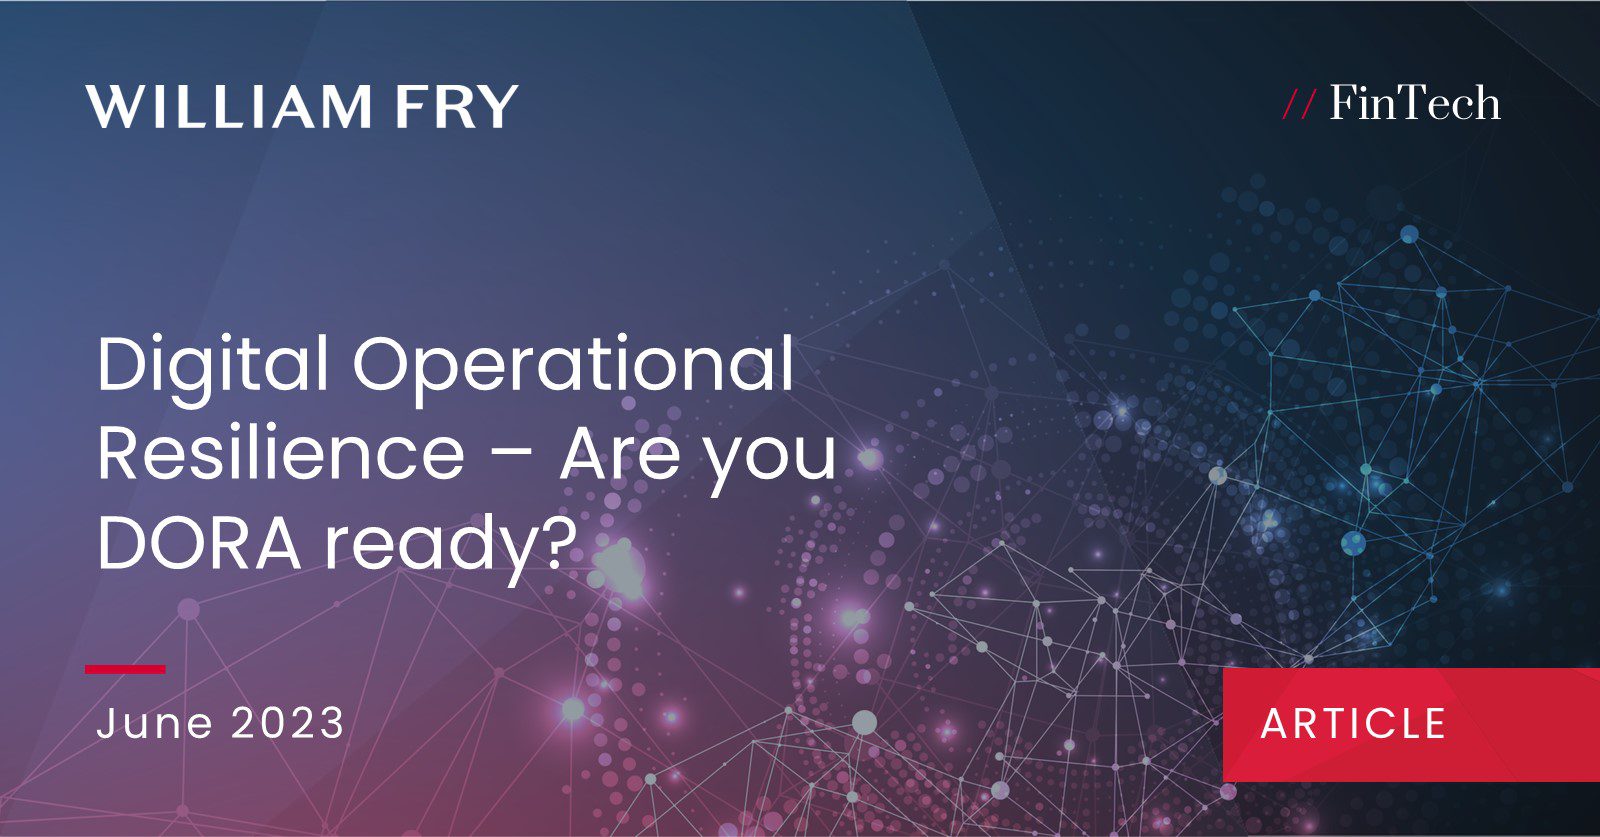 Digital Operational Resilience – Are you DORA ready?